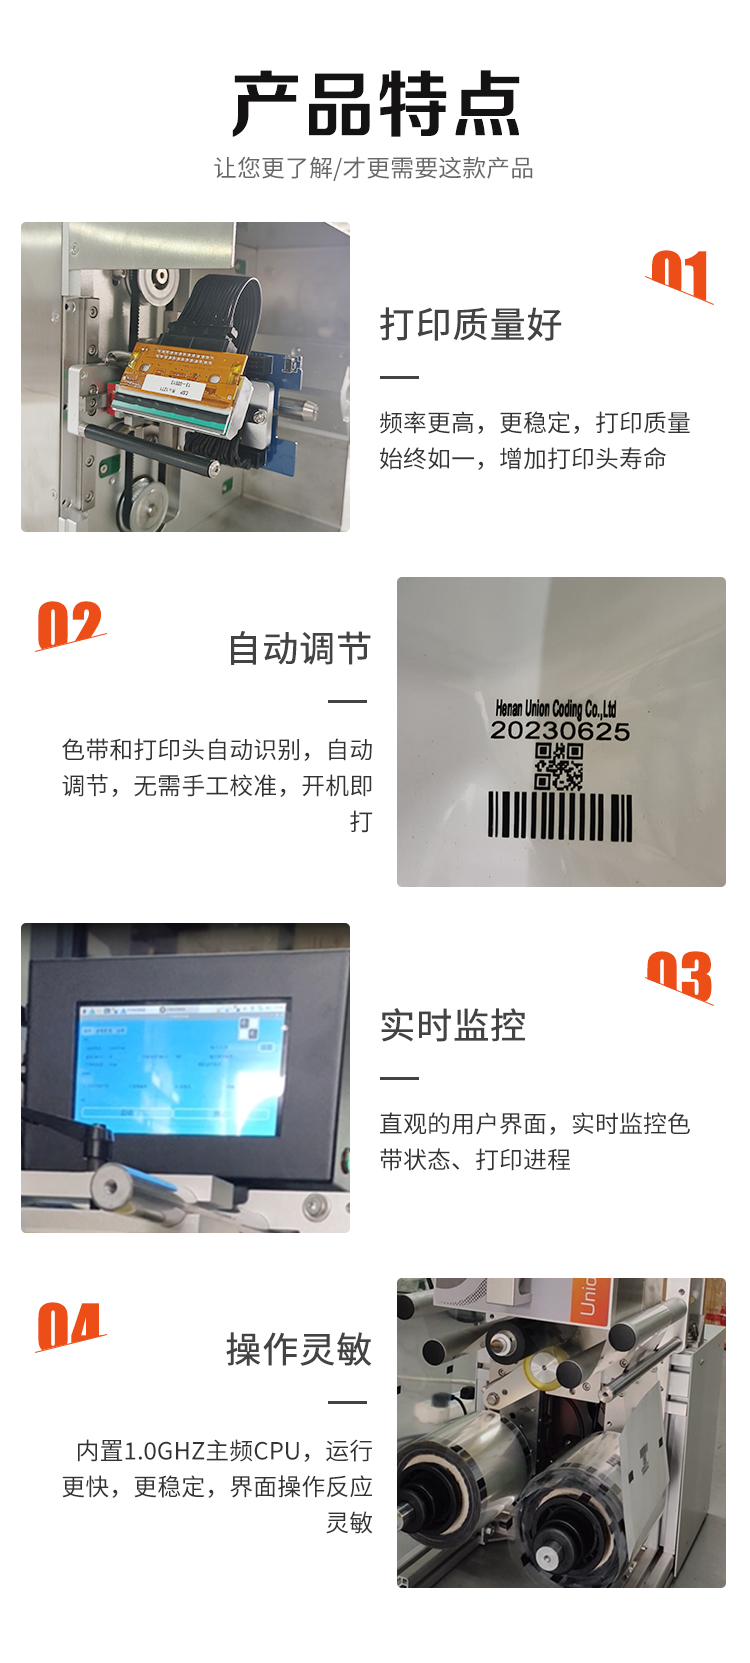 Hezhong New Product QR Code Heat Transfer Printing and Coding Machine X3 High Speed TTO Machine Printing Date Macon Replacement